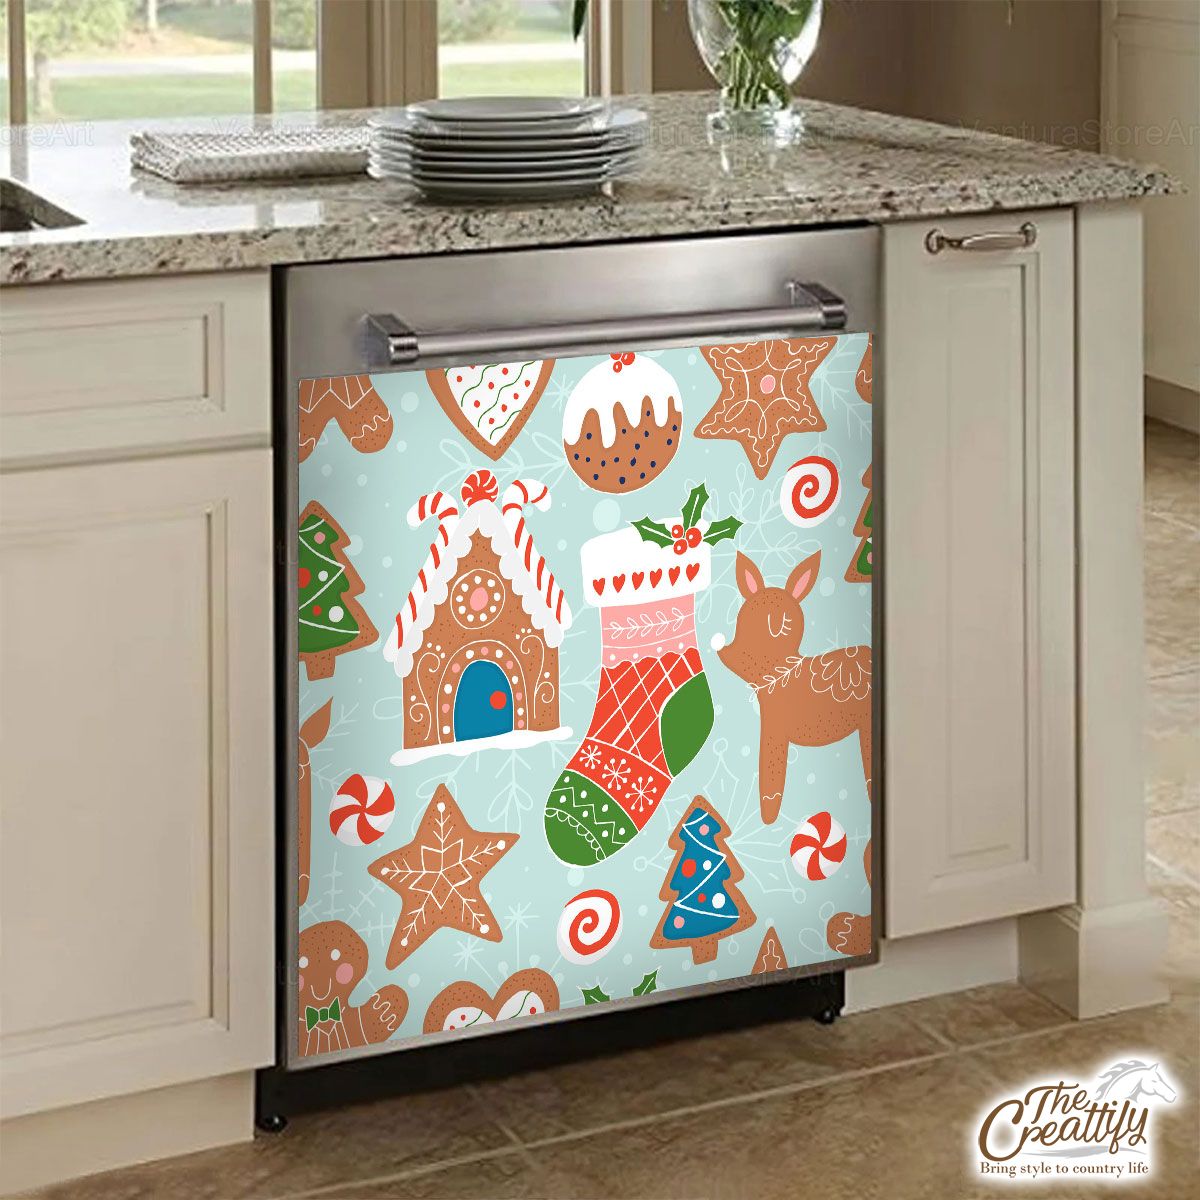 Gingerbread House And Christmas Socks Pattern Dishwasher Cover